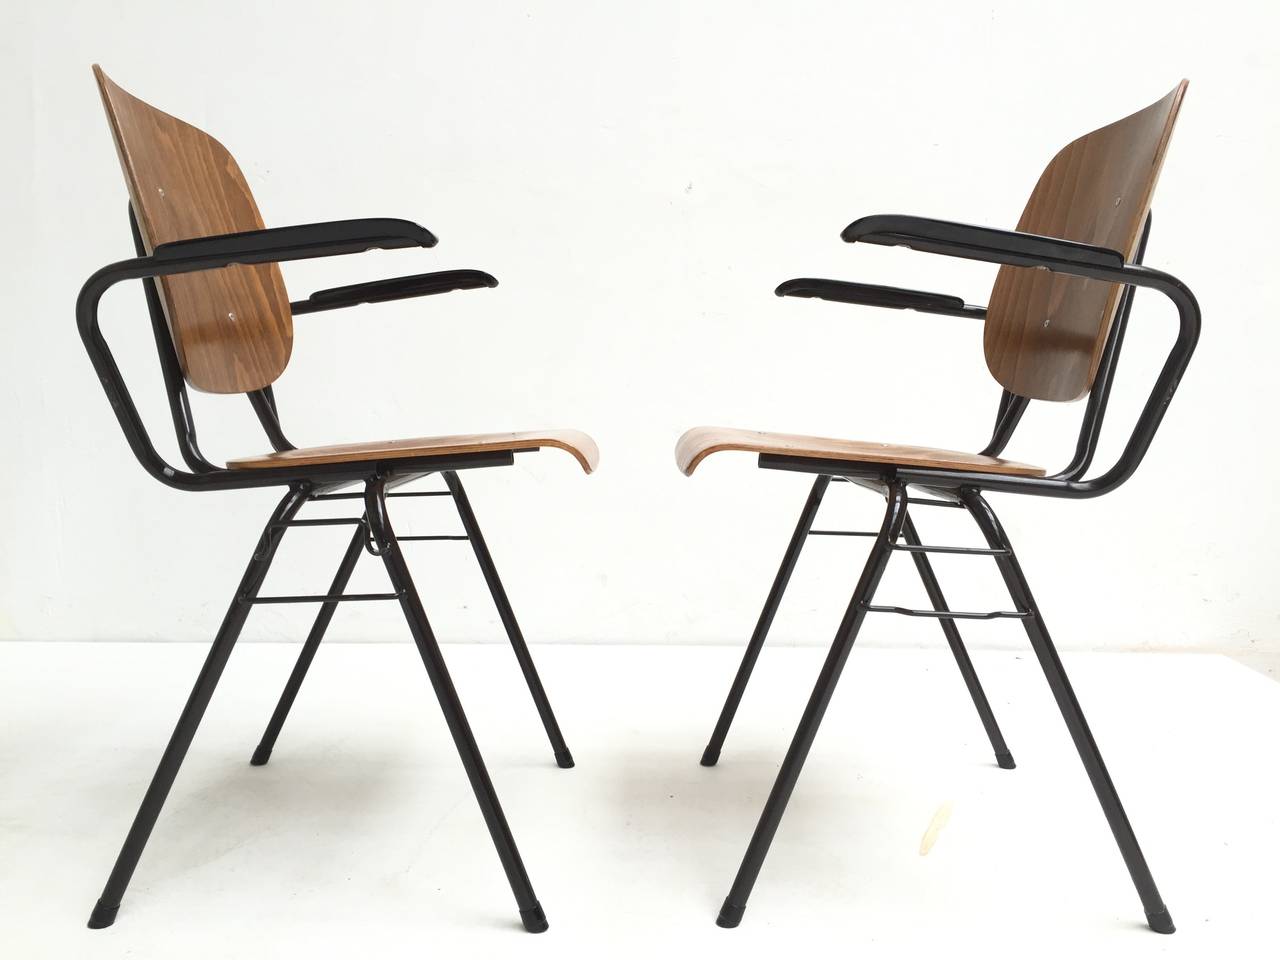 Bakelite Kho Liang Le Stackable and Linkable Chairs with Armrests Model 305 for CAR, 1957